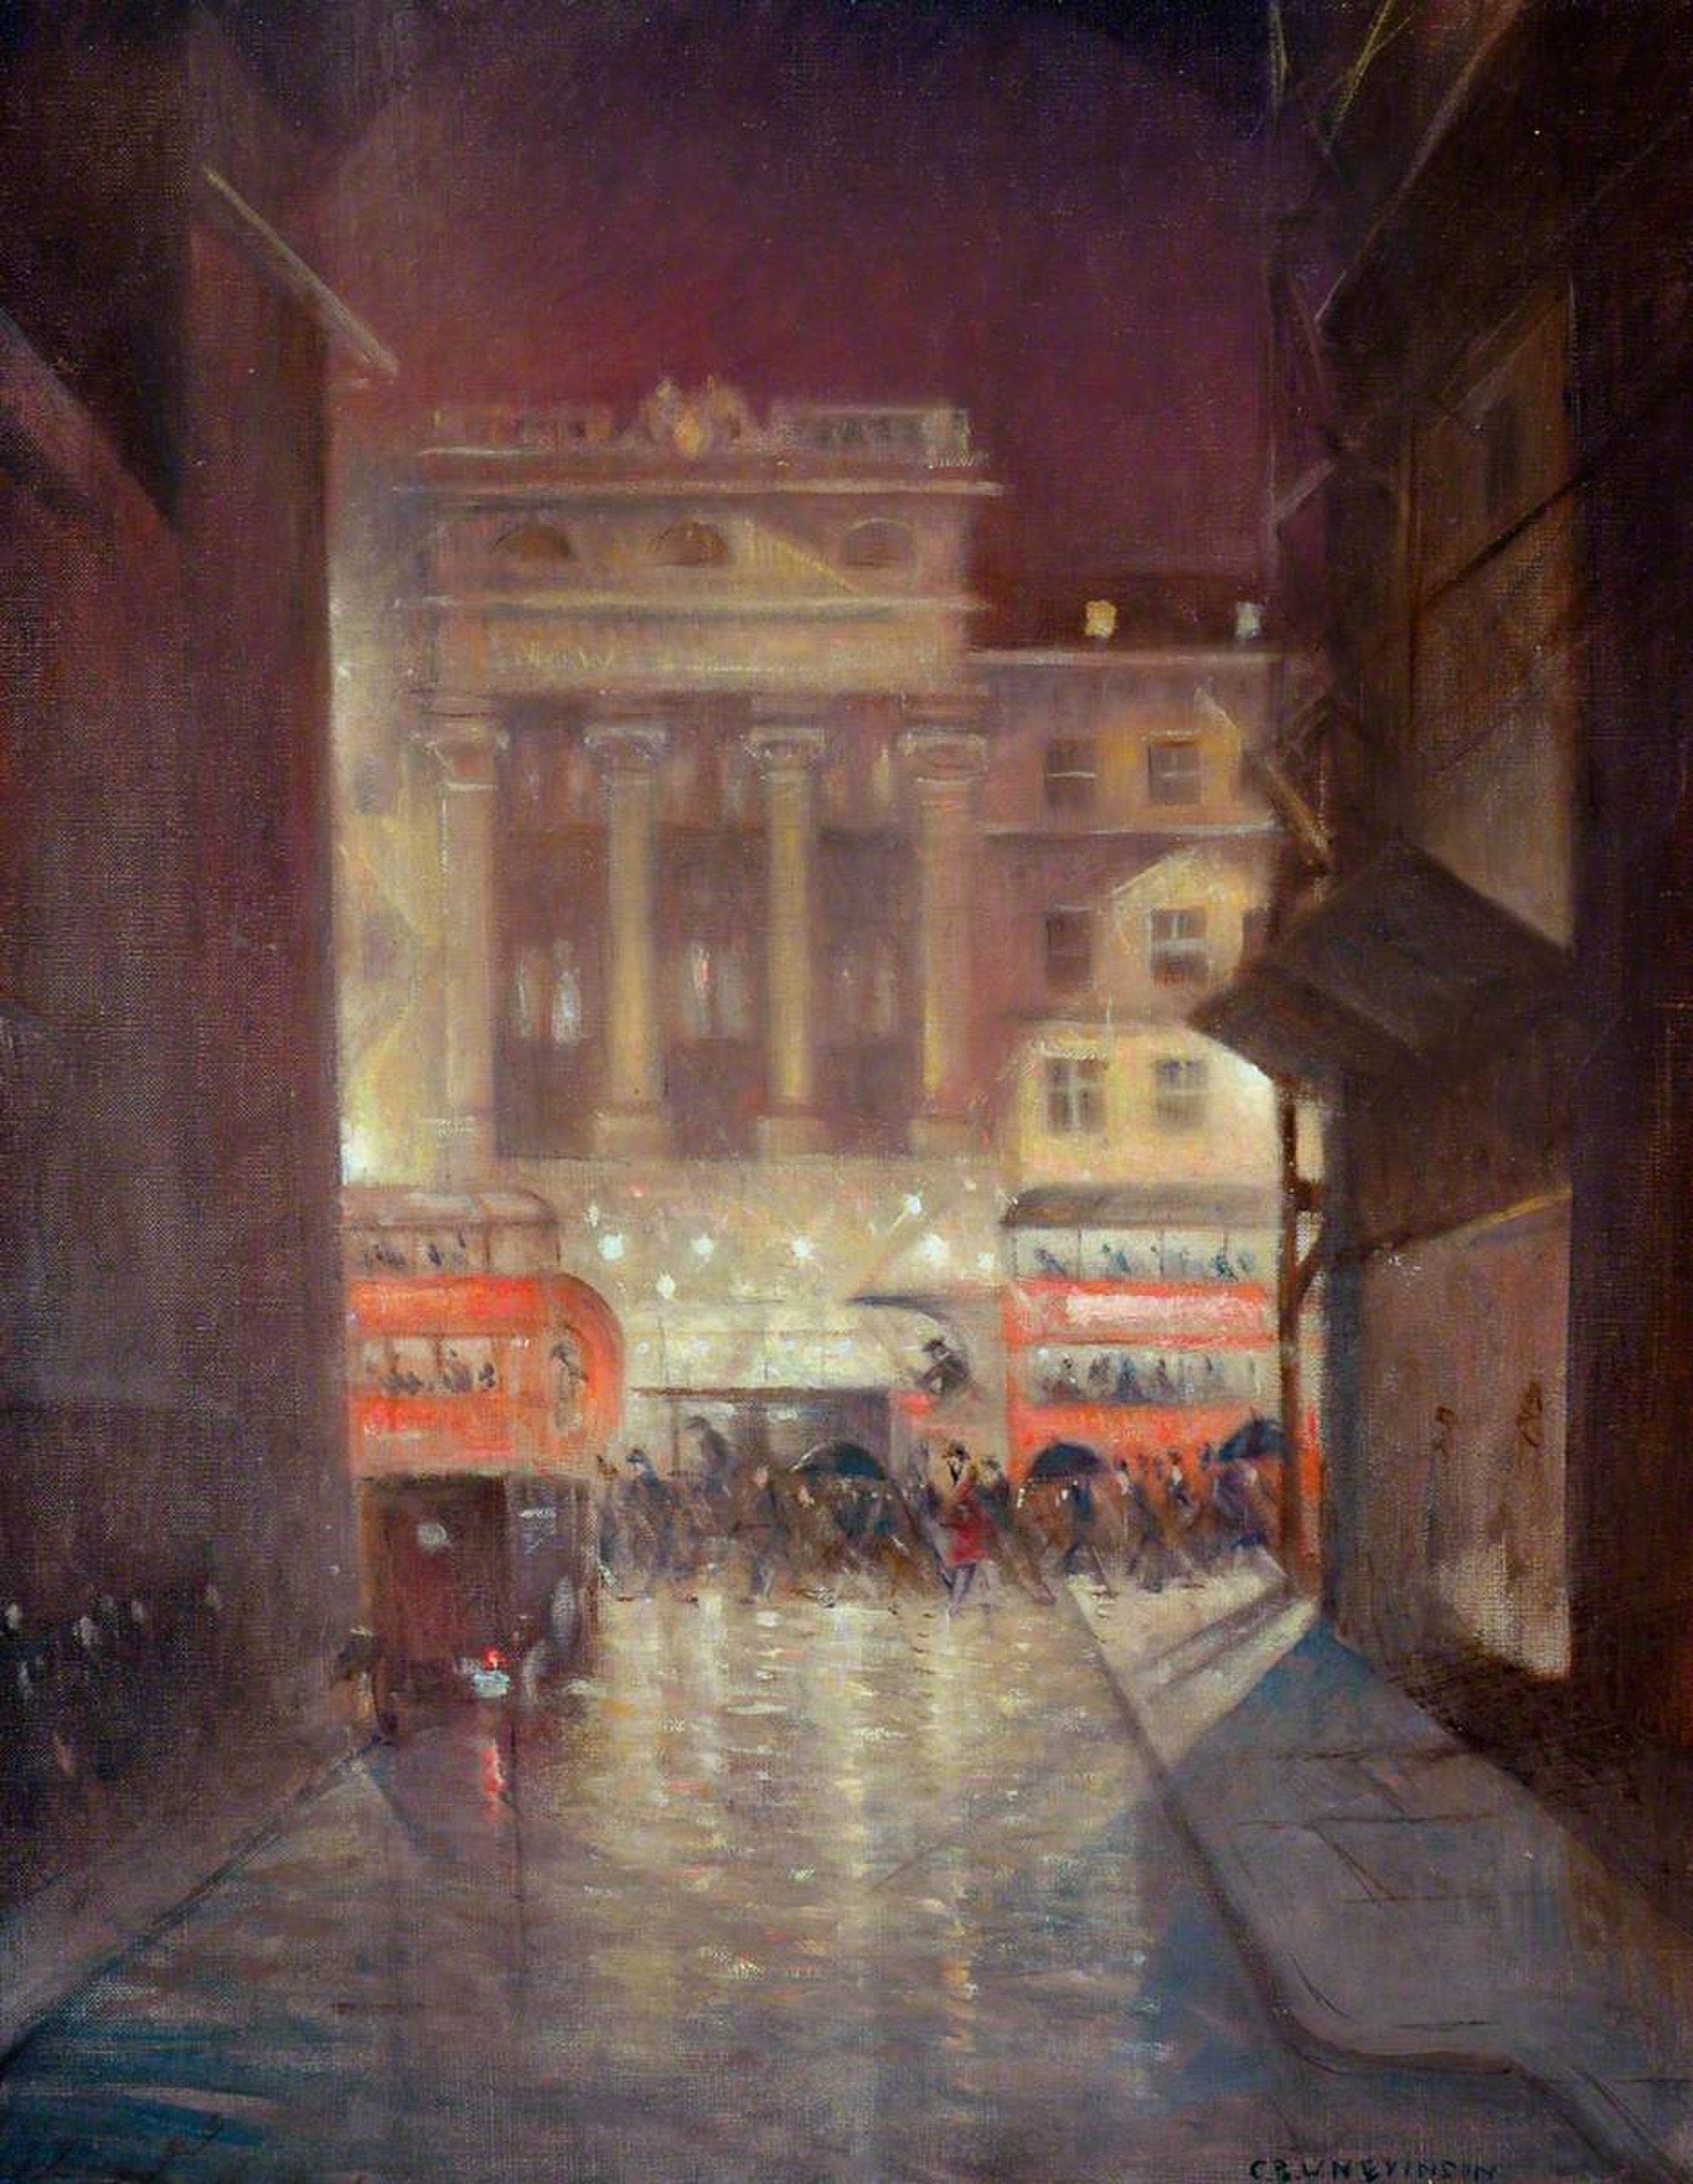 The Strand by Night art print (London, 1937) | 1930s wall art | Christopher R. W. Nevinson  The Trumpet Shop   